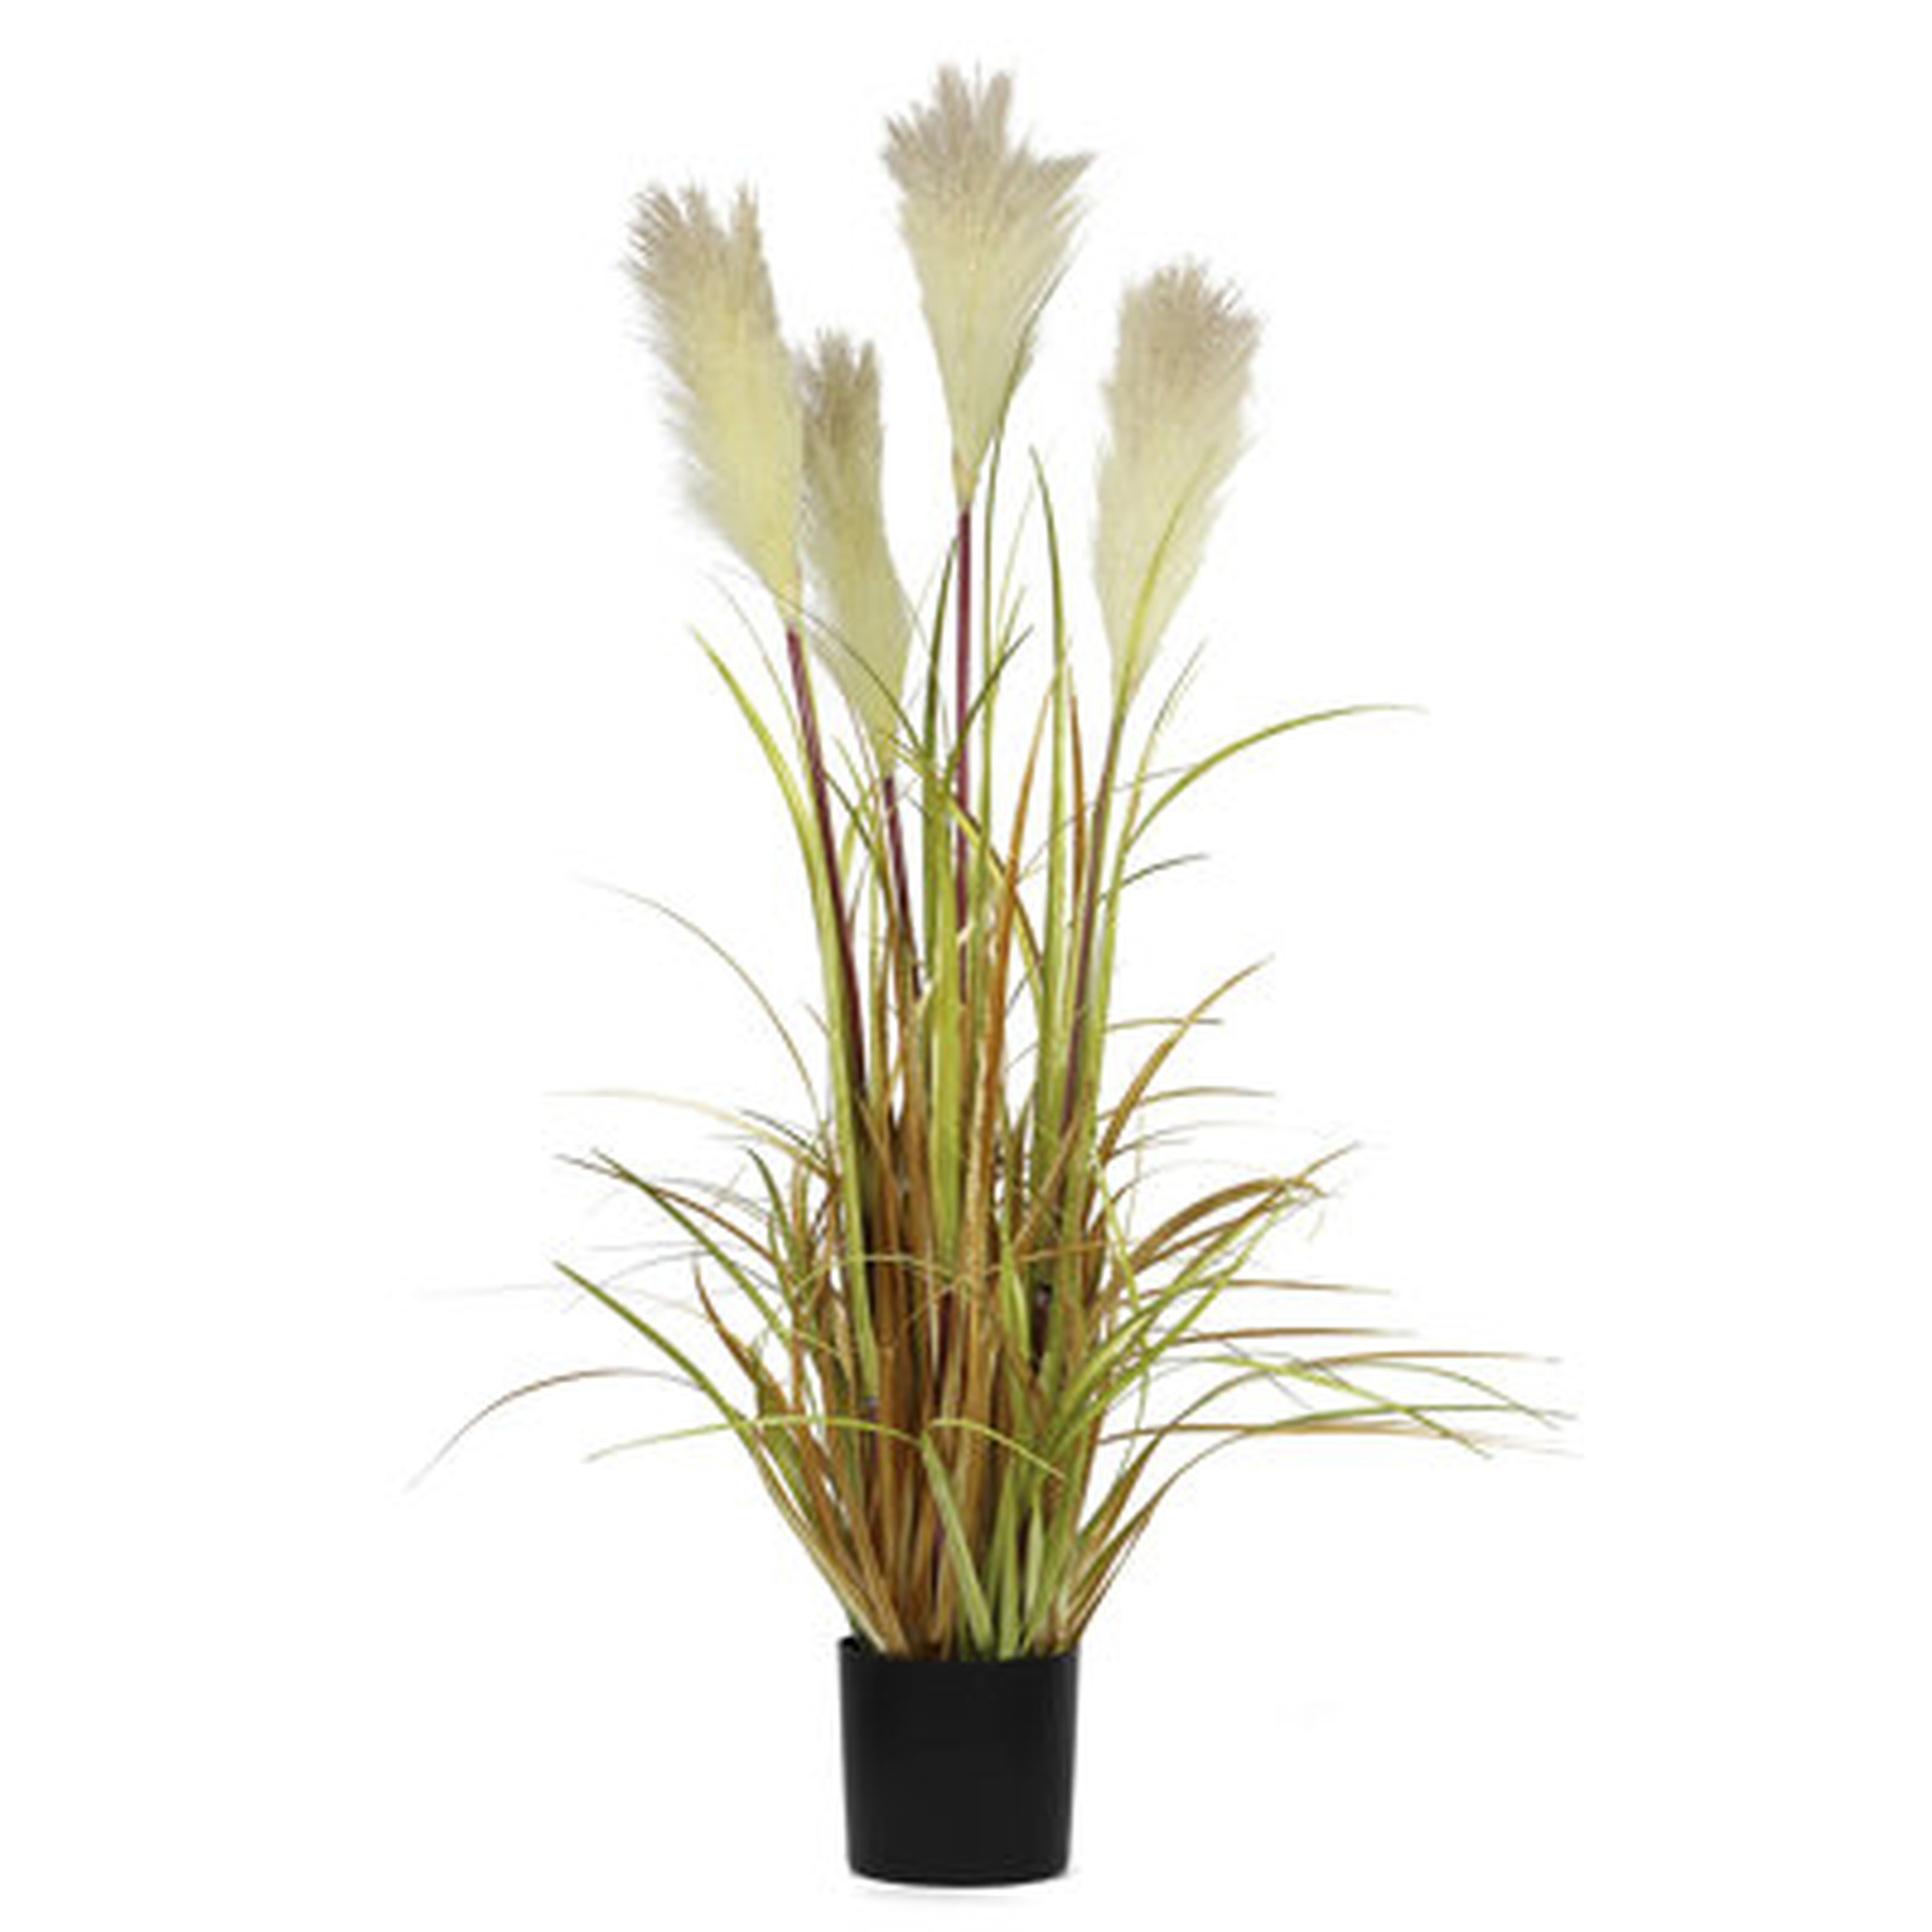 35" Tall Artificial Plants For Home Decor Indoor Natural Large Faux Fake Potted Plants With Black Planter Pot Office Floor Decorative Reed Grasses Gift - Wayfair